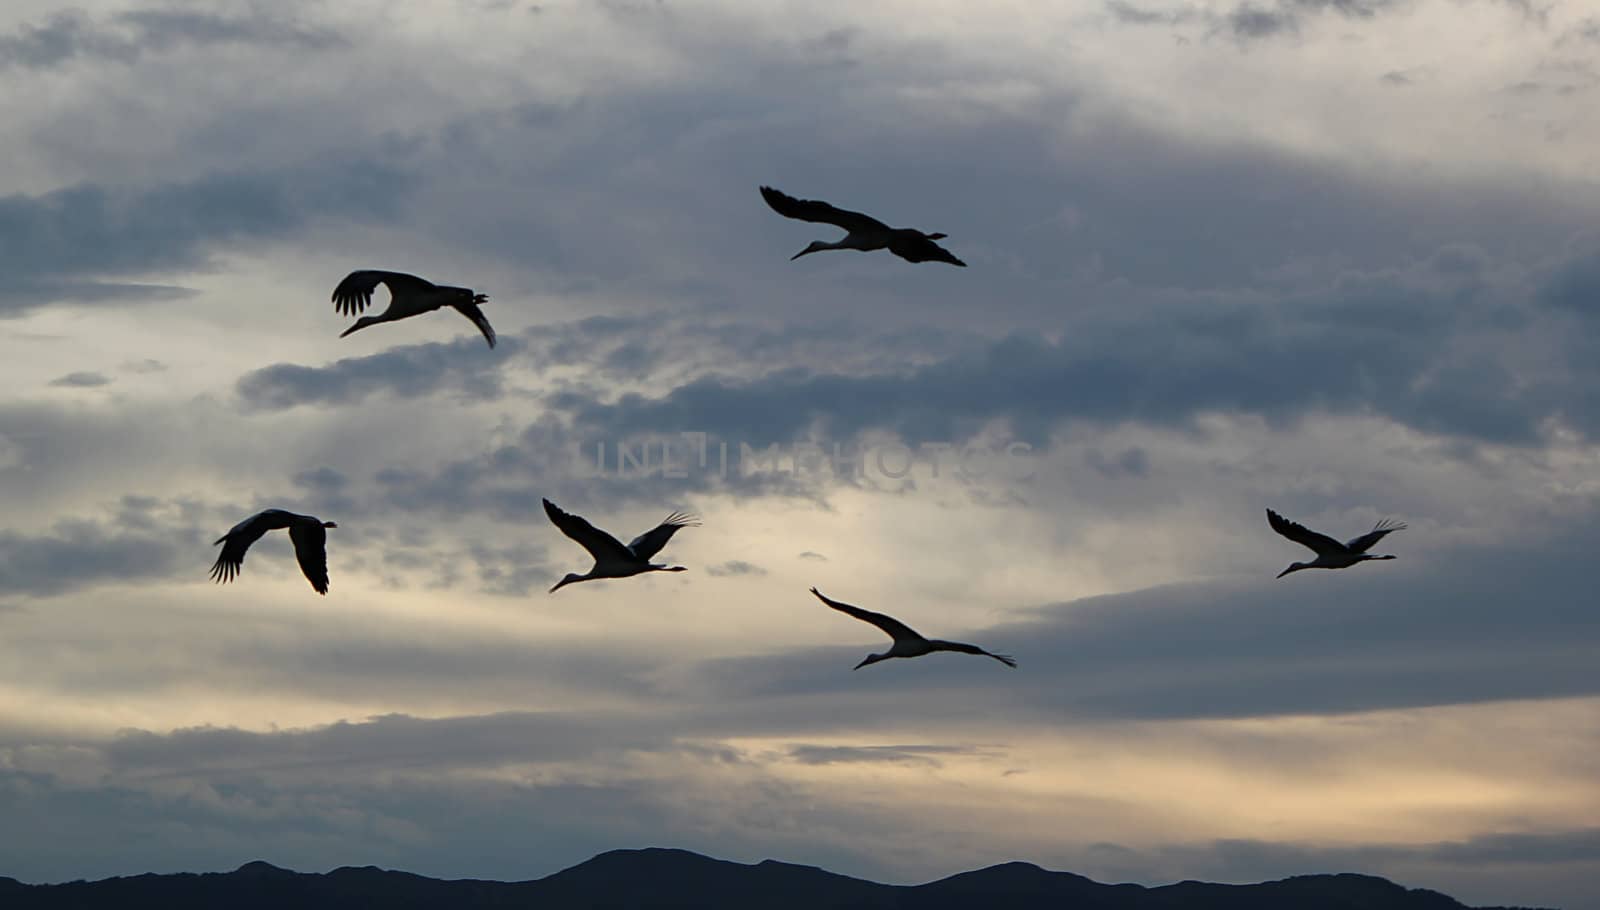 Several storks flying upon the mountain in a cloudy sky by sunset